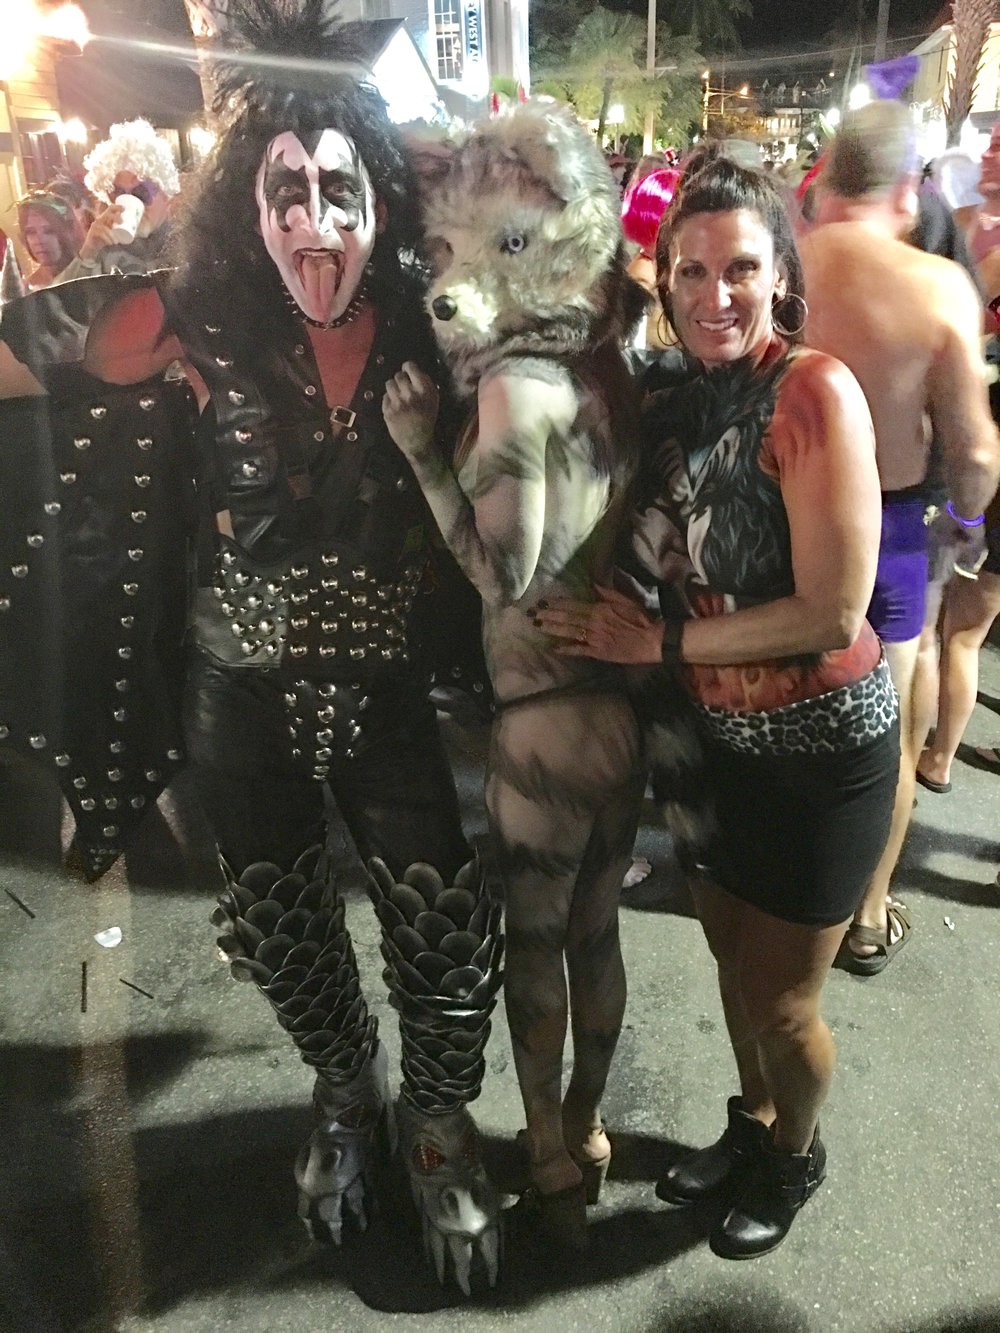  Alessandra Torre in wolf body paint at Fantasy Fest 2016 in Key West - nude with KISS costume man and woman 